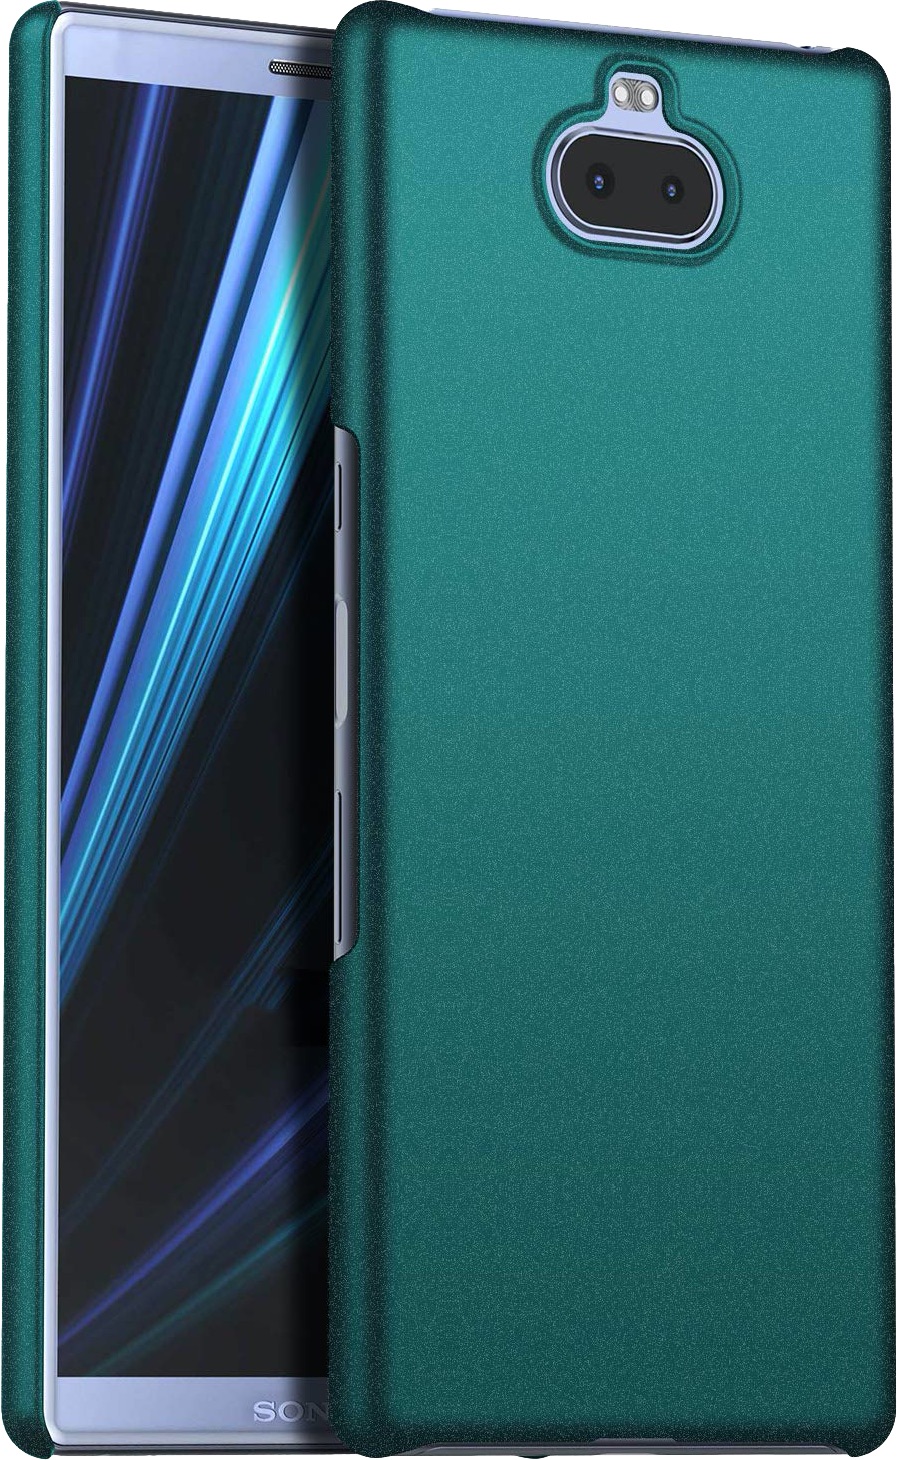 Best Sony Xperia 10 Cases in 2019 6